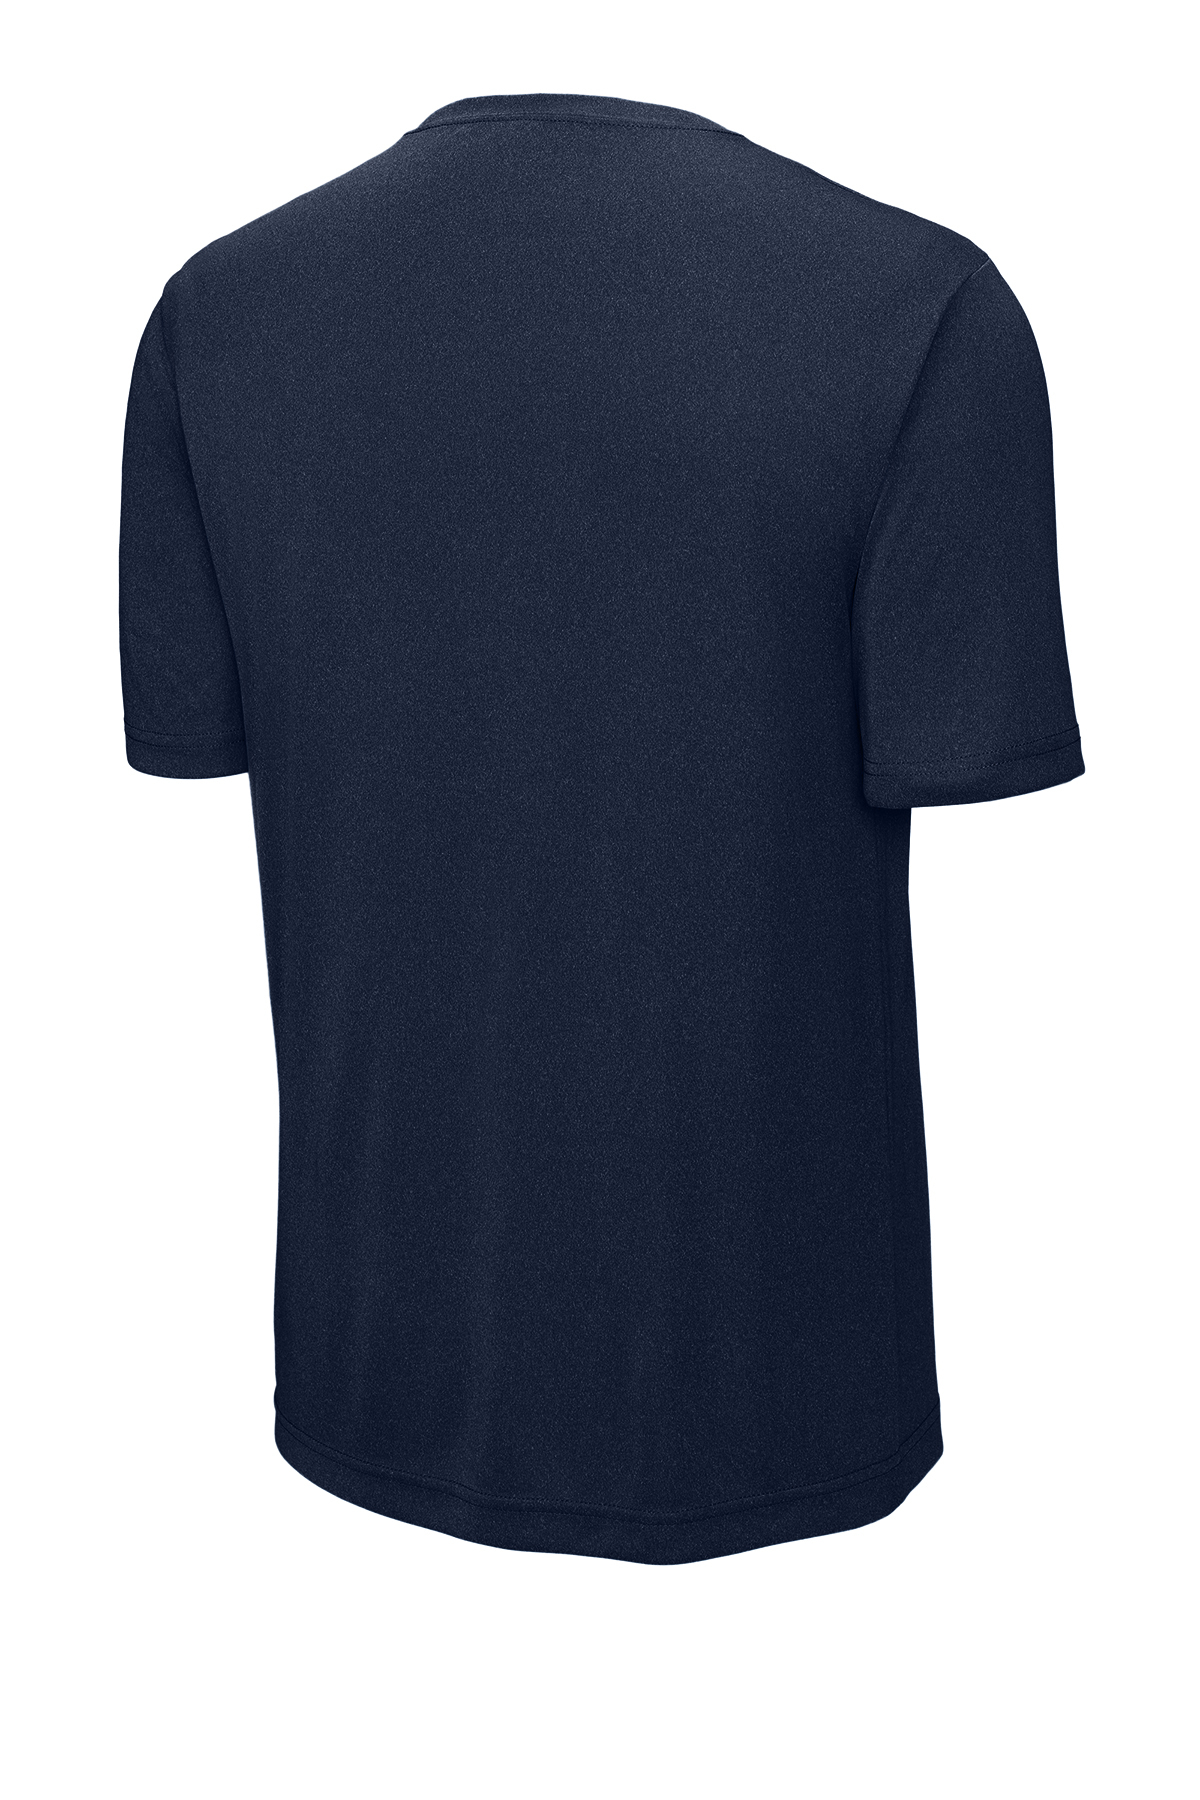 Sport-Tek PosiCharge Competitor™ Tee | Product | Company Casuals